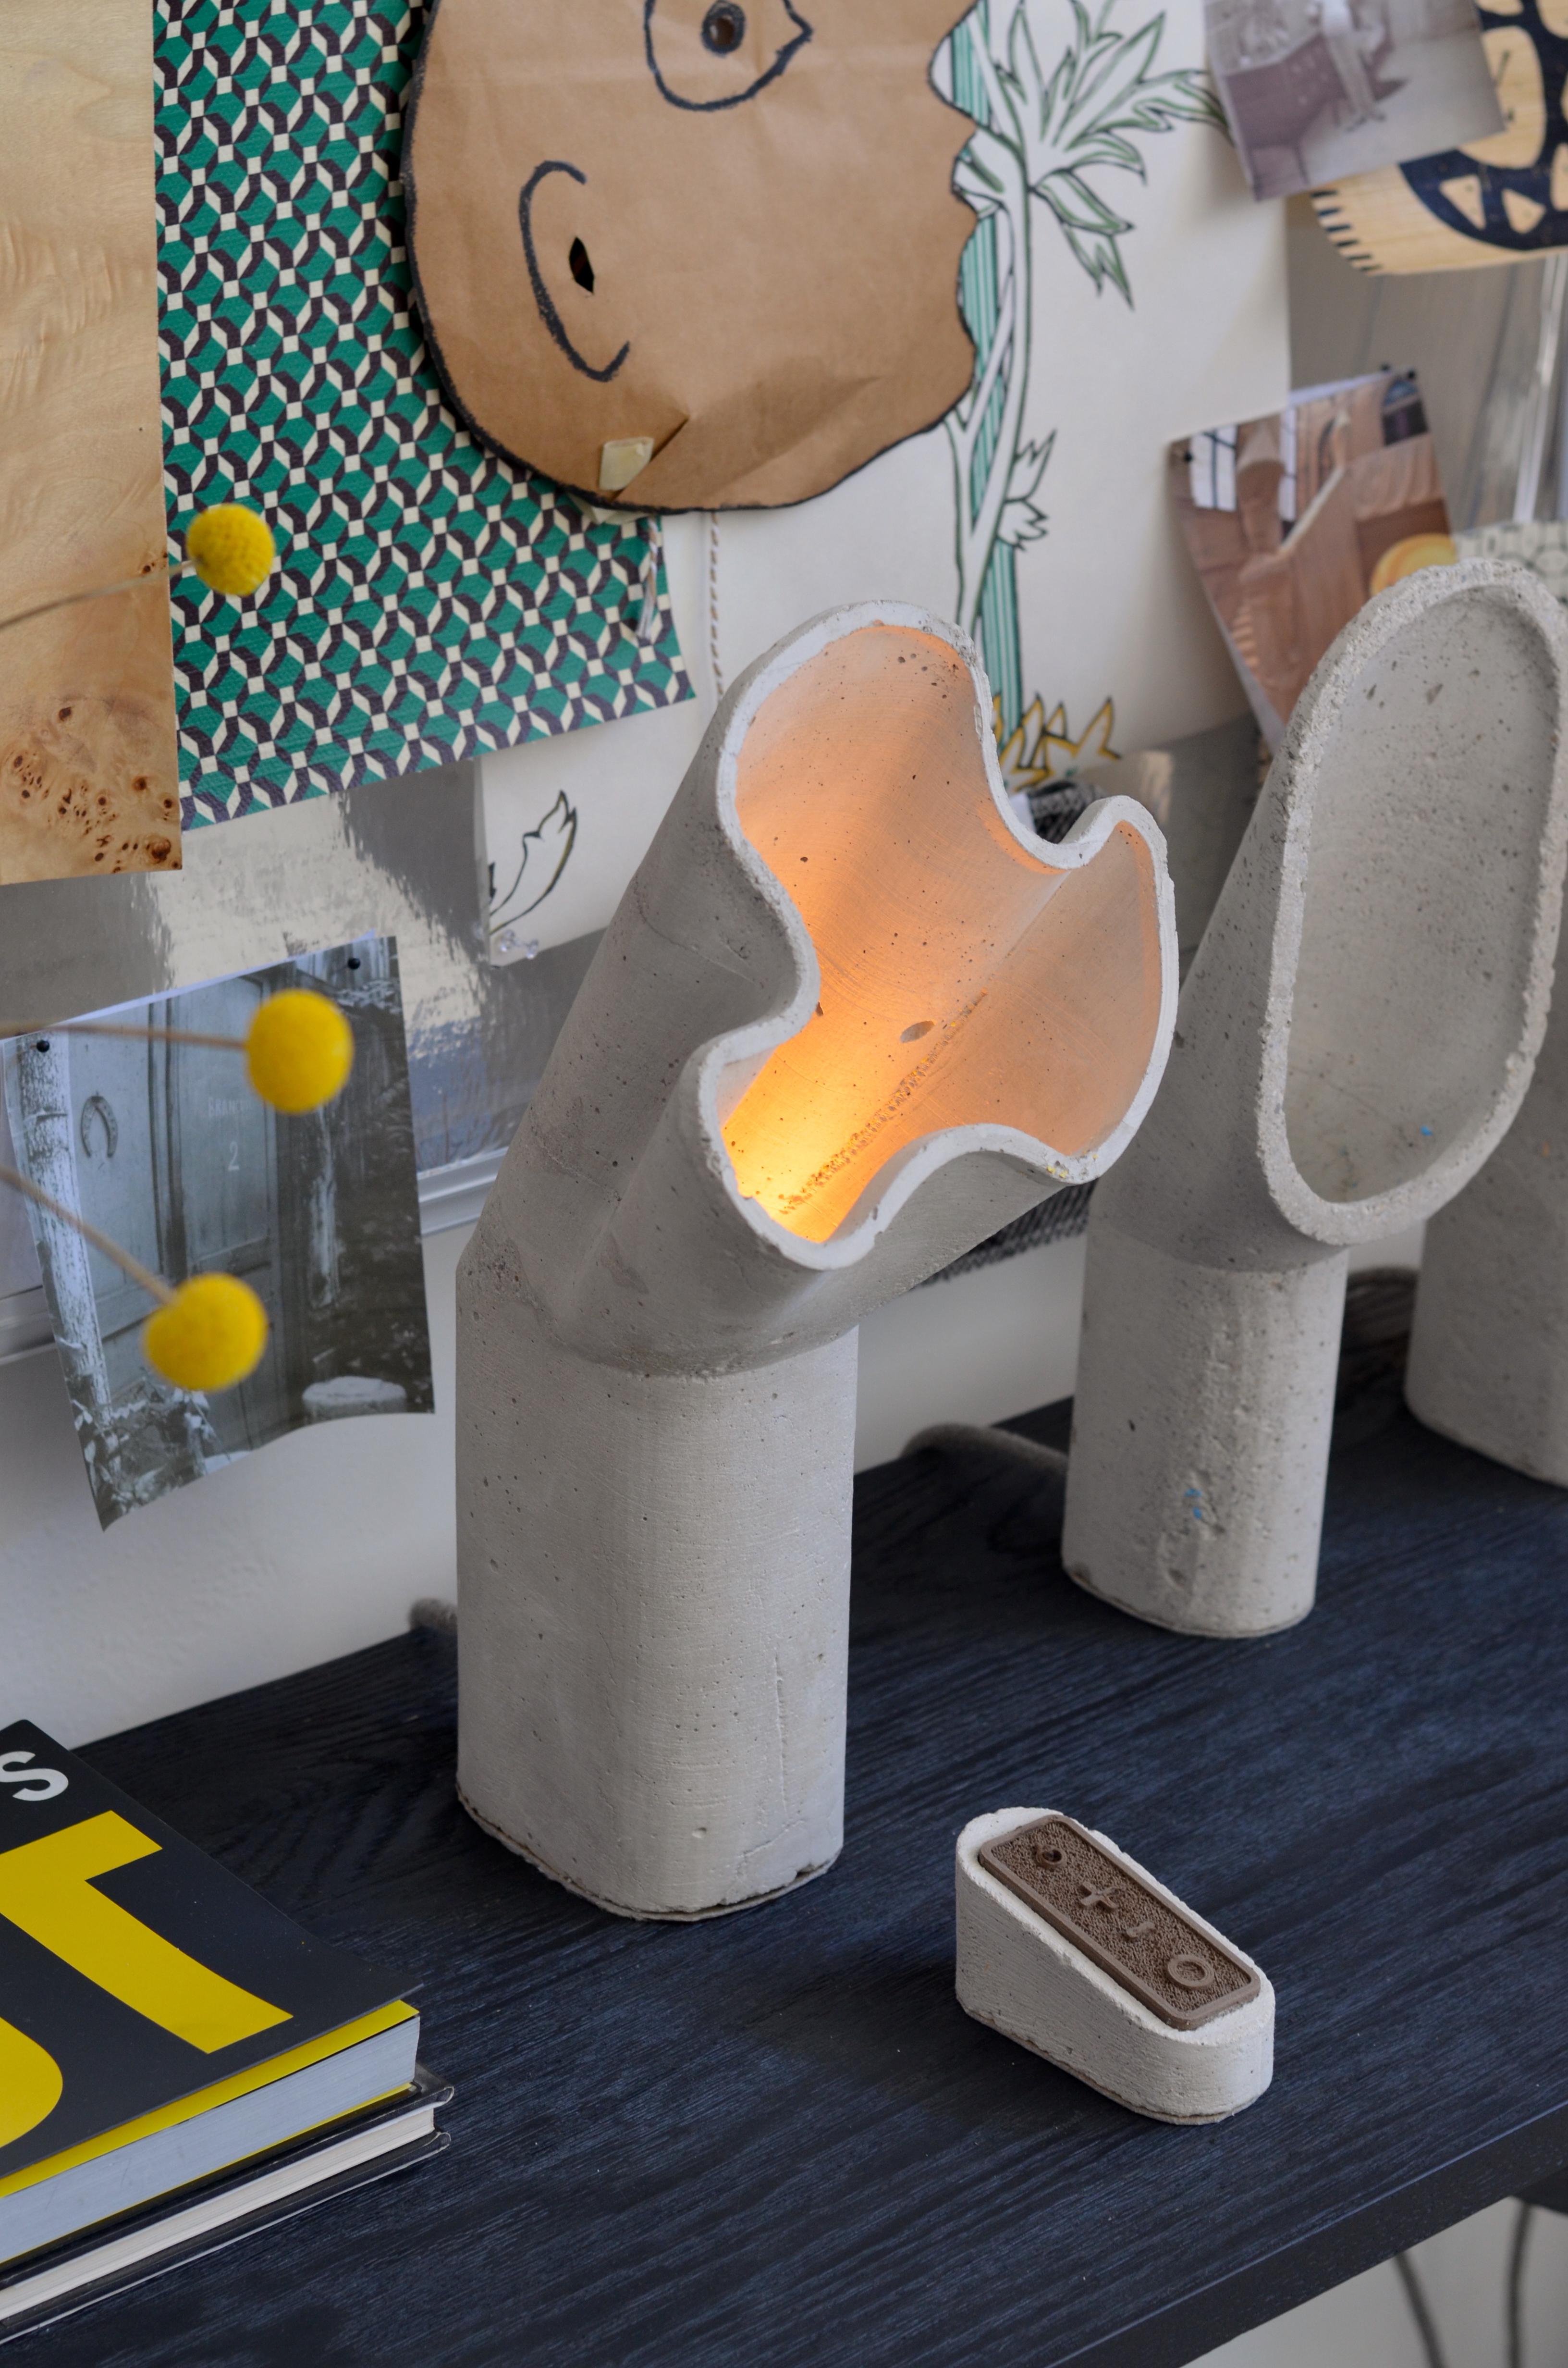 The 'Aline' is a sculptural concrete lamp designed by London-based contemporary lighting designer James Haywood.

It is created using low-impact concrete, with an environmental footprint 45 times smaller than that of Portland cement, recycled PETG